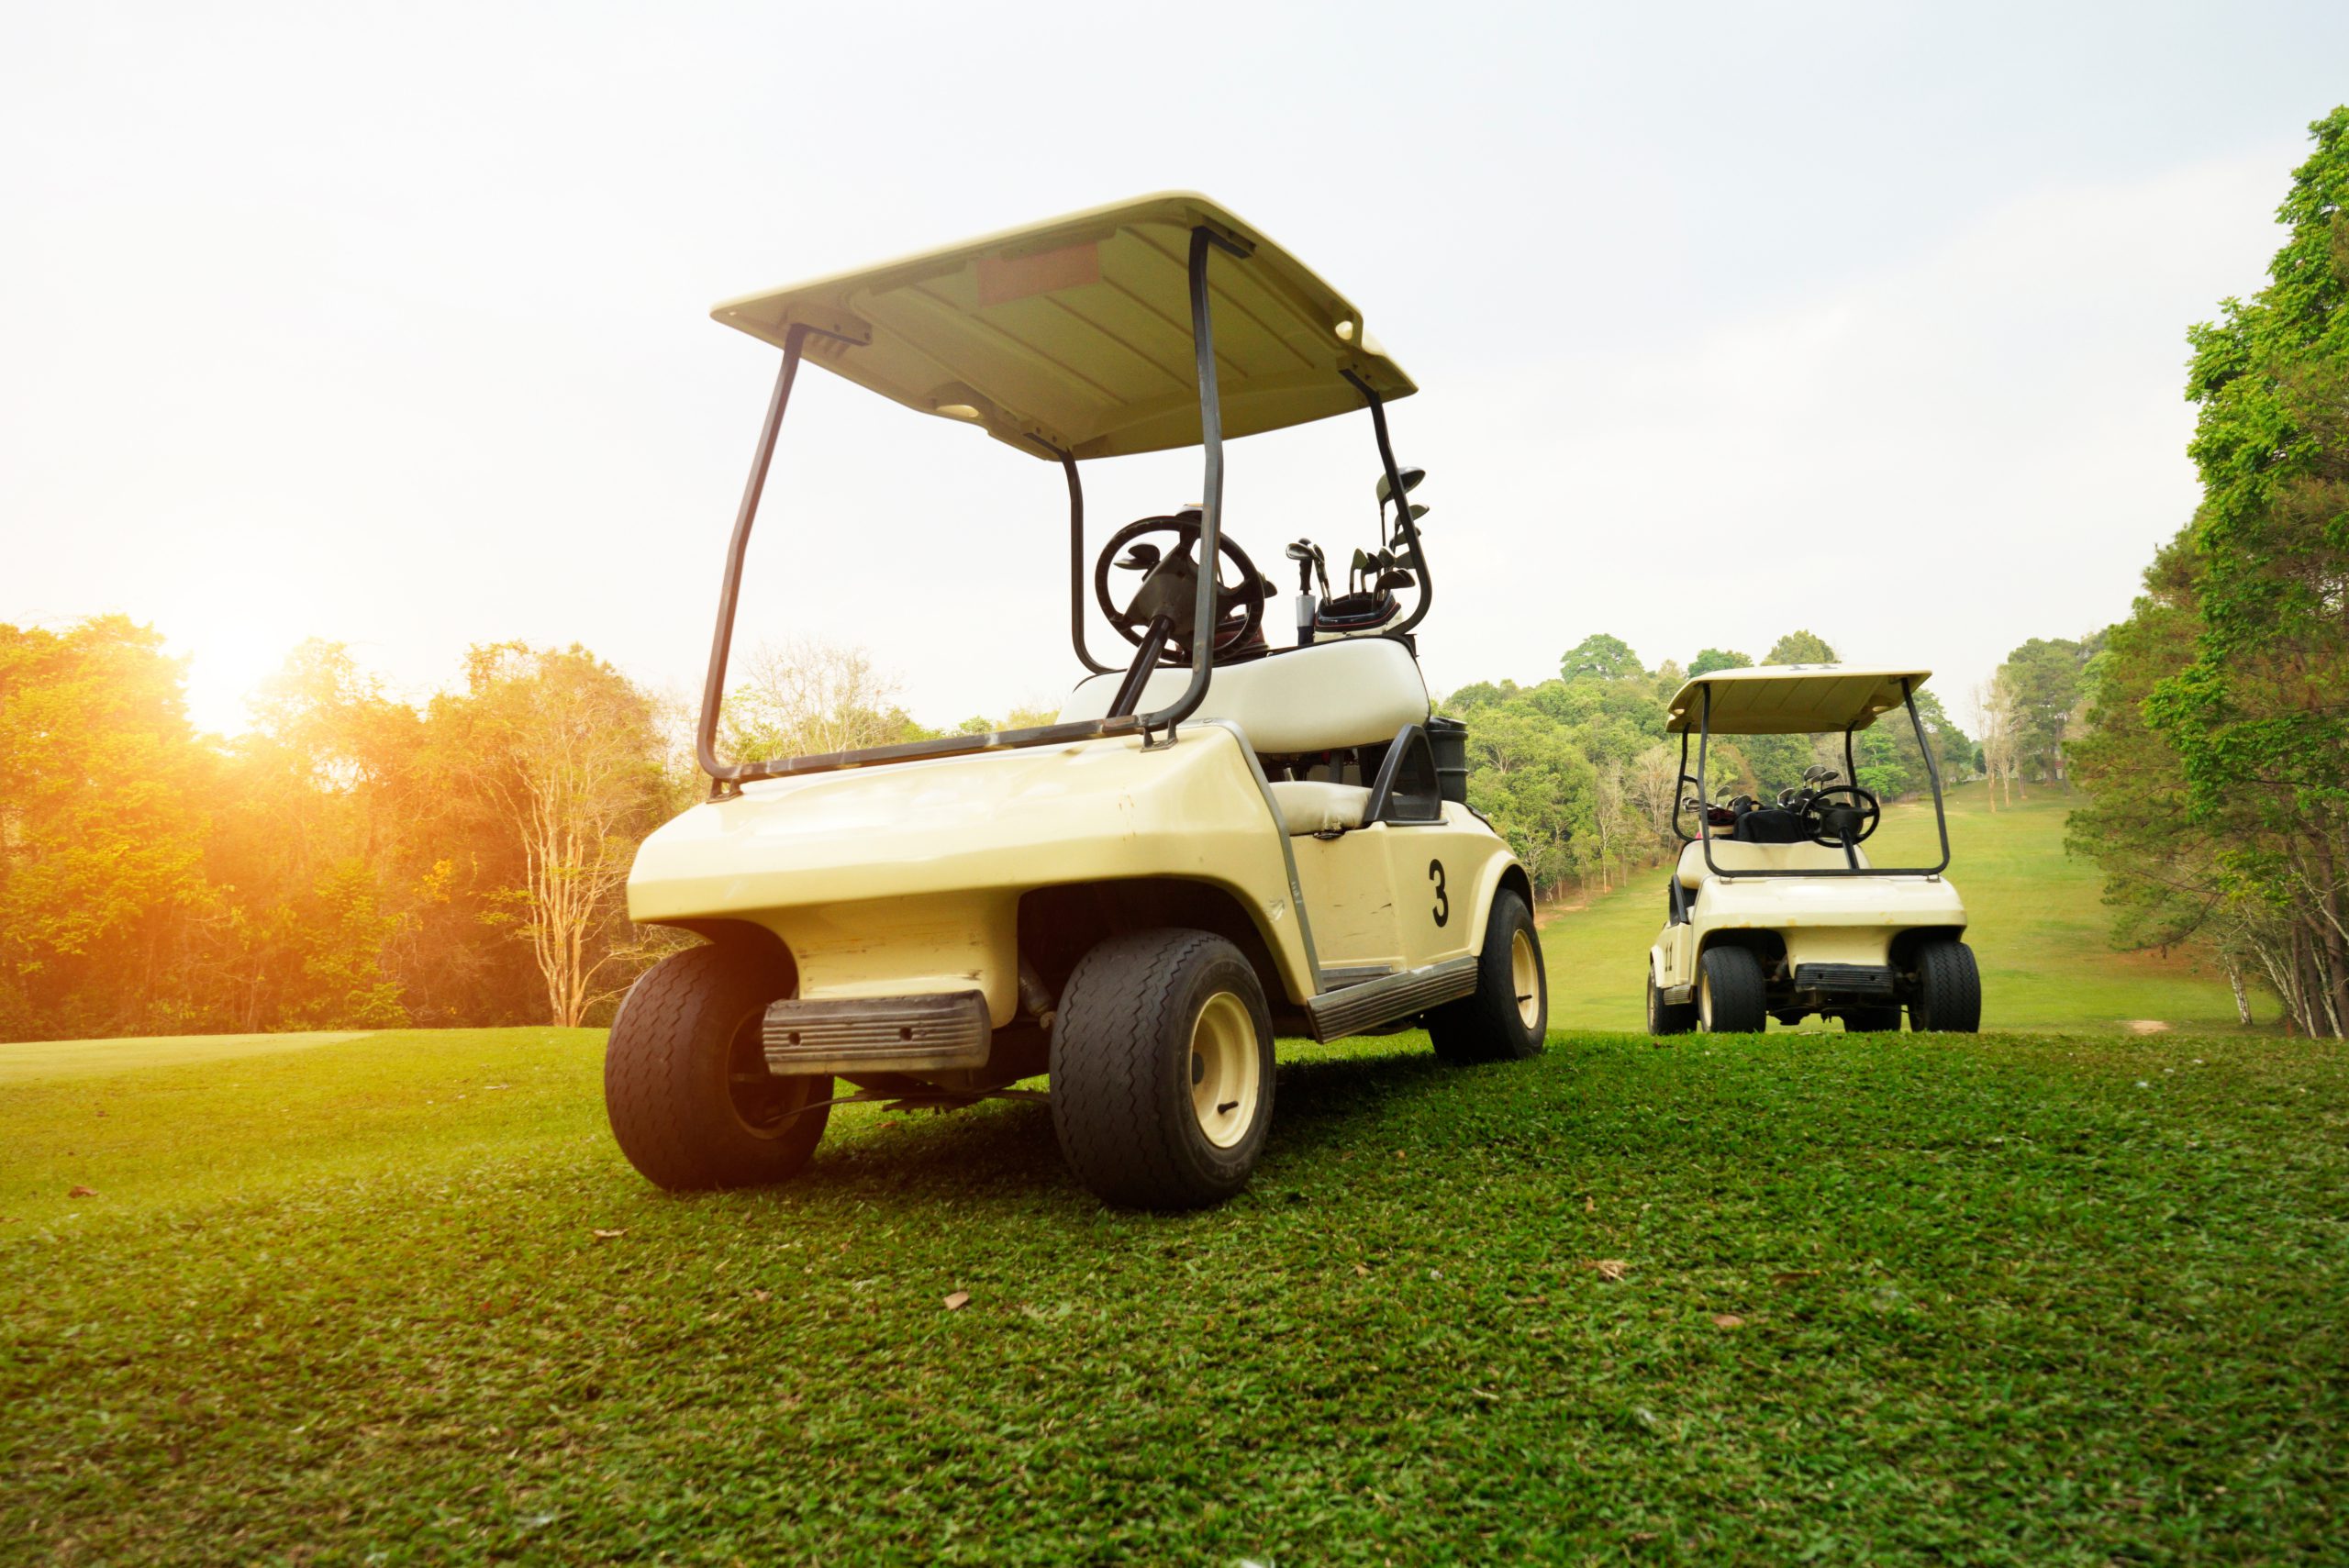 Golf Cart Insurance - Why You Need It